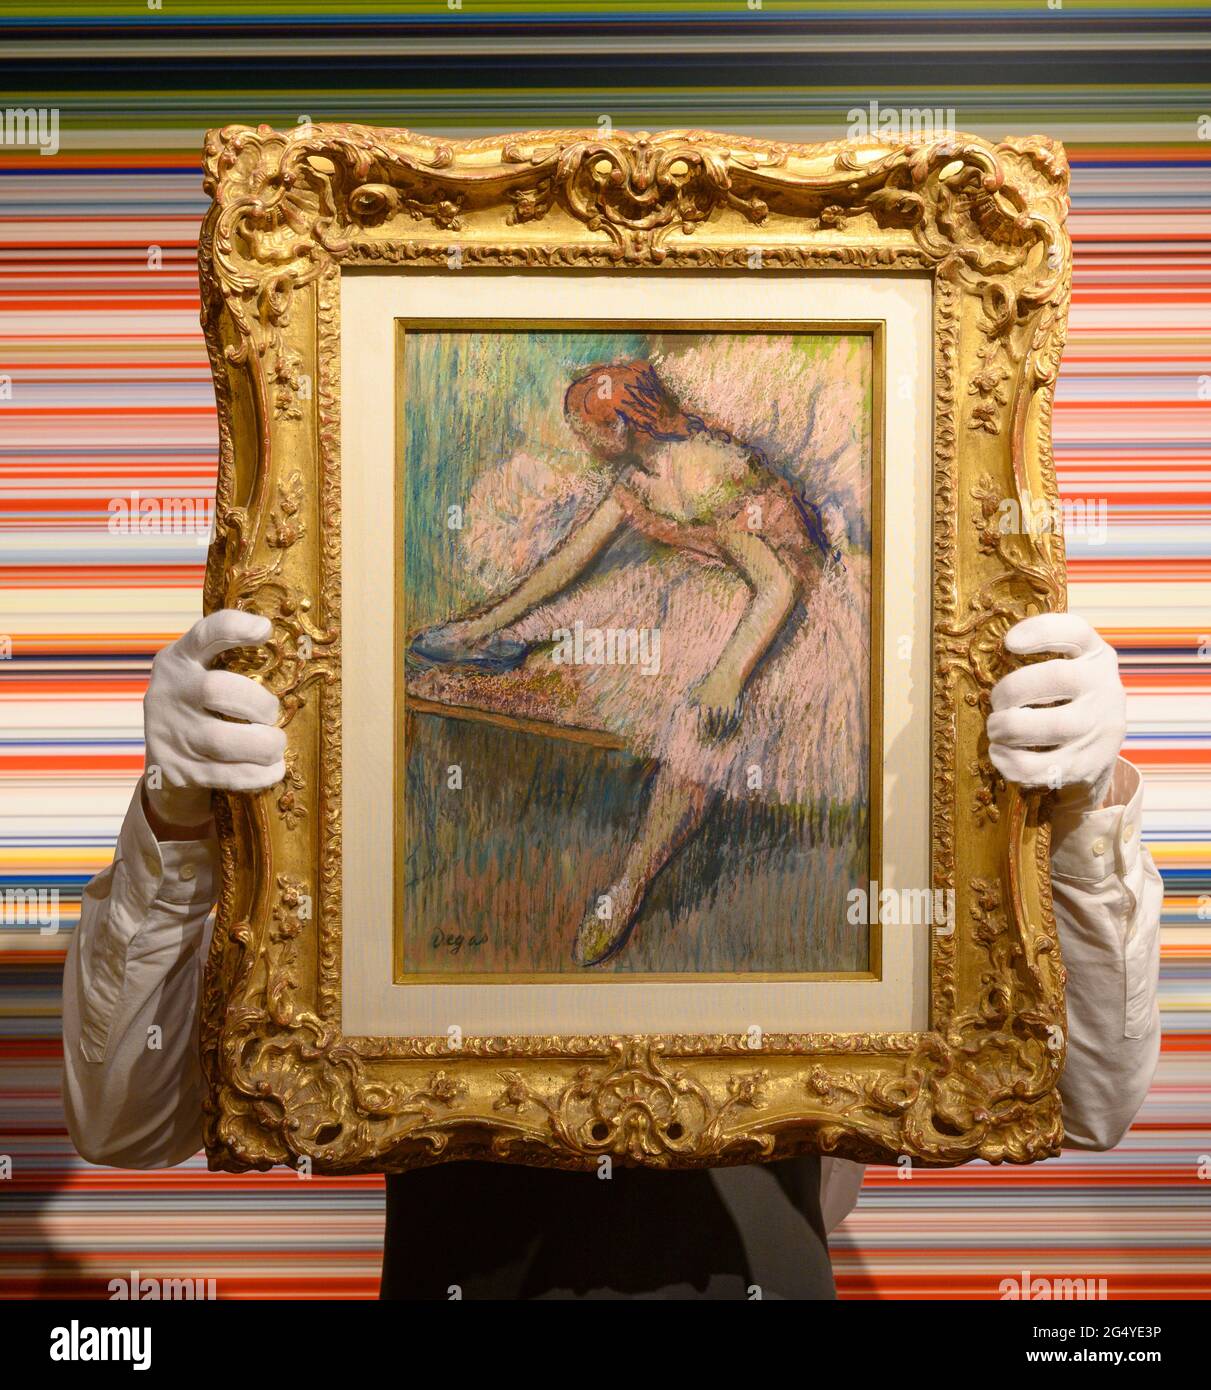 Christie’s, London, UK. 24 June 2021. Works by Basquiat, Degas, Giacometti, Kusama, Picasso and Bridget Riley feature in the 20th century art sale, to be held on 30 June in London. Image: Danseuse rose by Edgar Degas, pastel on paper circa 1896, estimate £2,500,000-3,500,000 in front of Strip by Gerhard Richter, estimate: £800,000-1,200,000. Credit: Malcolm Park/Alamy Live News. Stock Photo